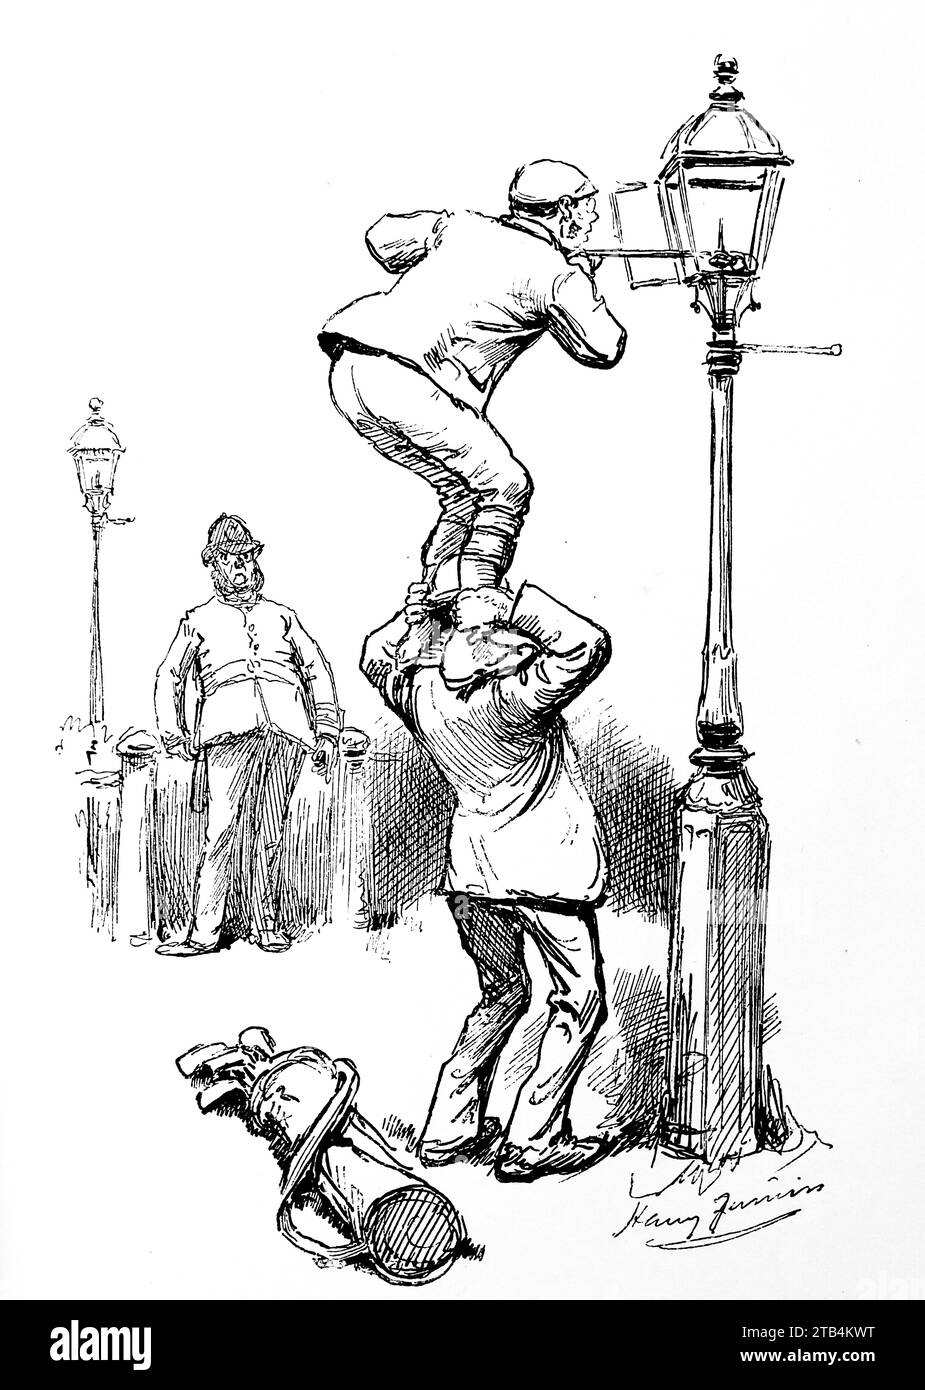 A Caddie’s Duties, comic picture of a caddie retrieving a ball from a streetlamp, by H. Furniss. From an illustration about golf, dating from 1889 to 1901. The history of golf is a long one. Though its origins are disputed, historians are generally agreed that what is known as “modern” golf began in the Middle Ages in Scotland. It was not until the mid to late nineteenth century that this sport became more popular in wider Britain, the British Empire and then the United States. Over the years the humble golf ball and golf club have changed vastly. Stock Photo